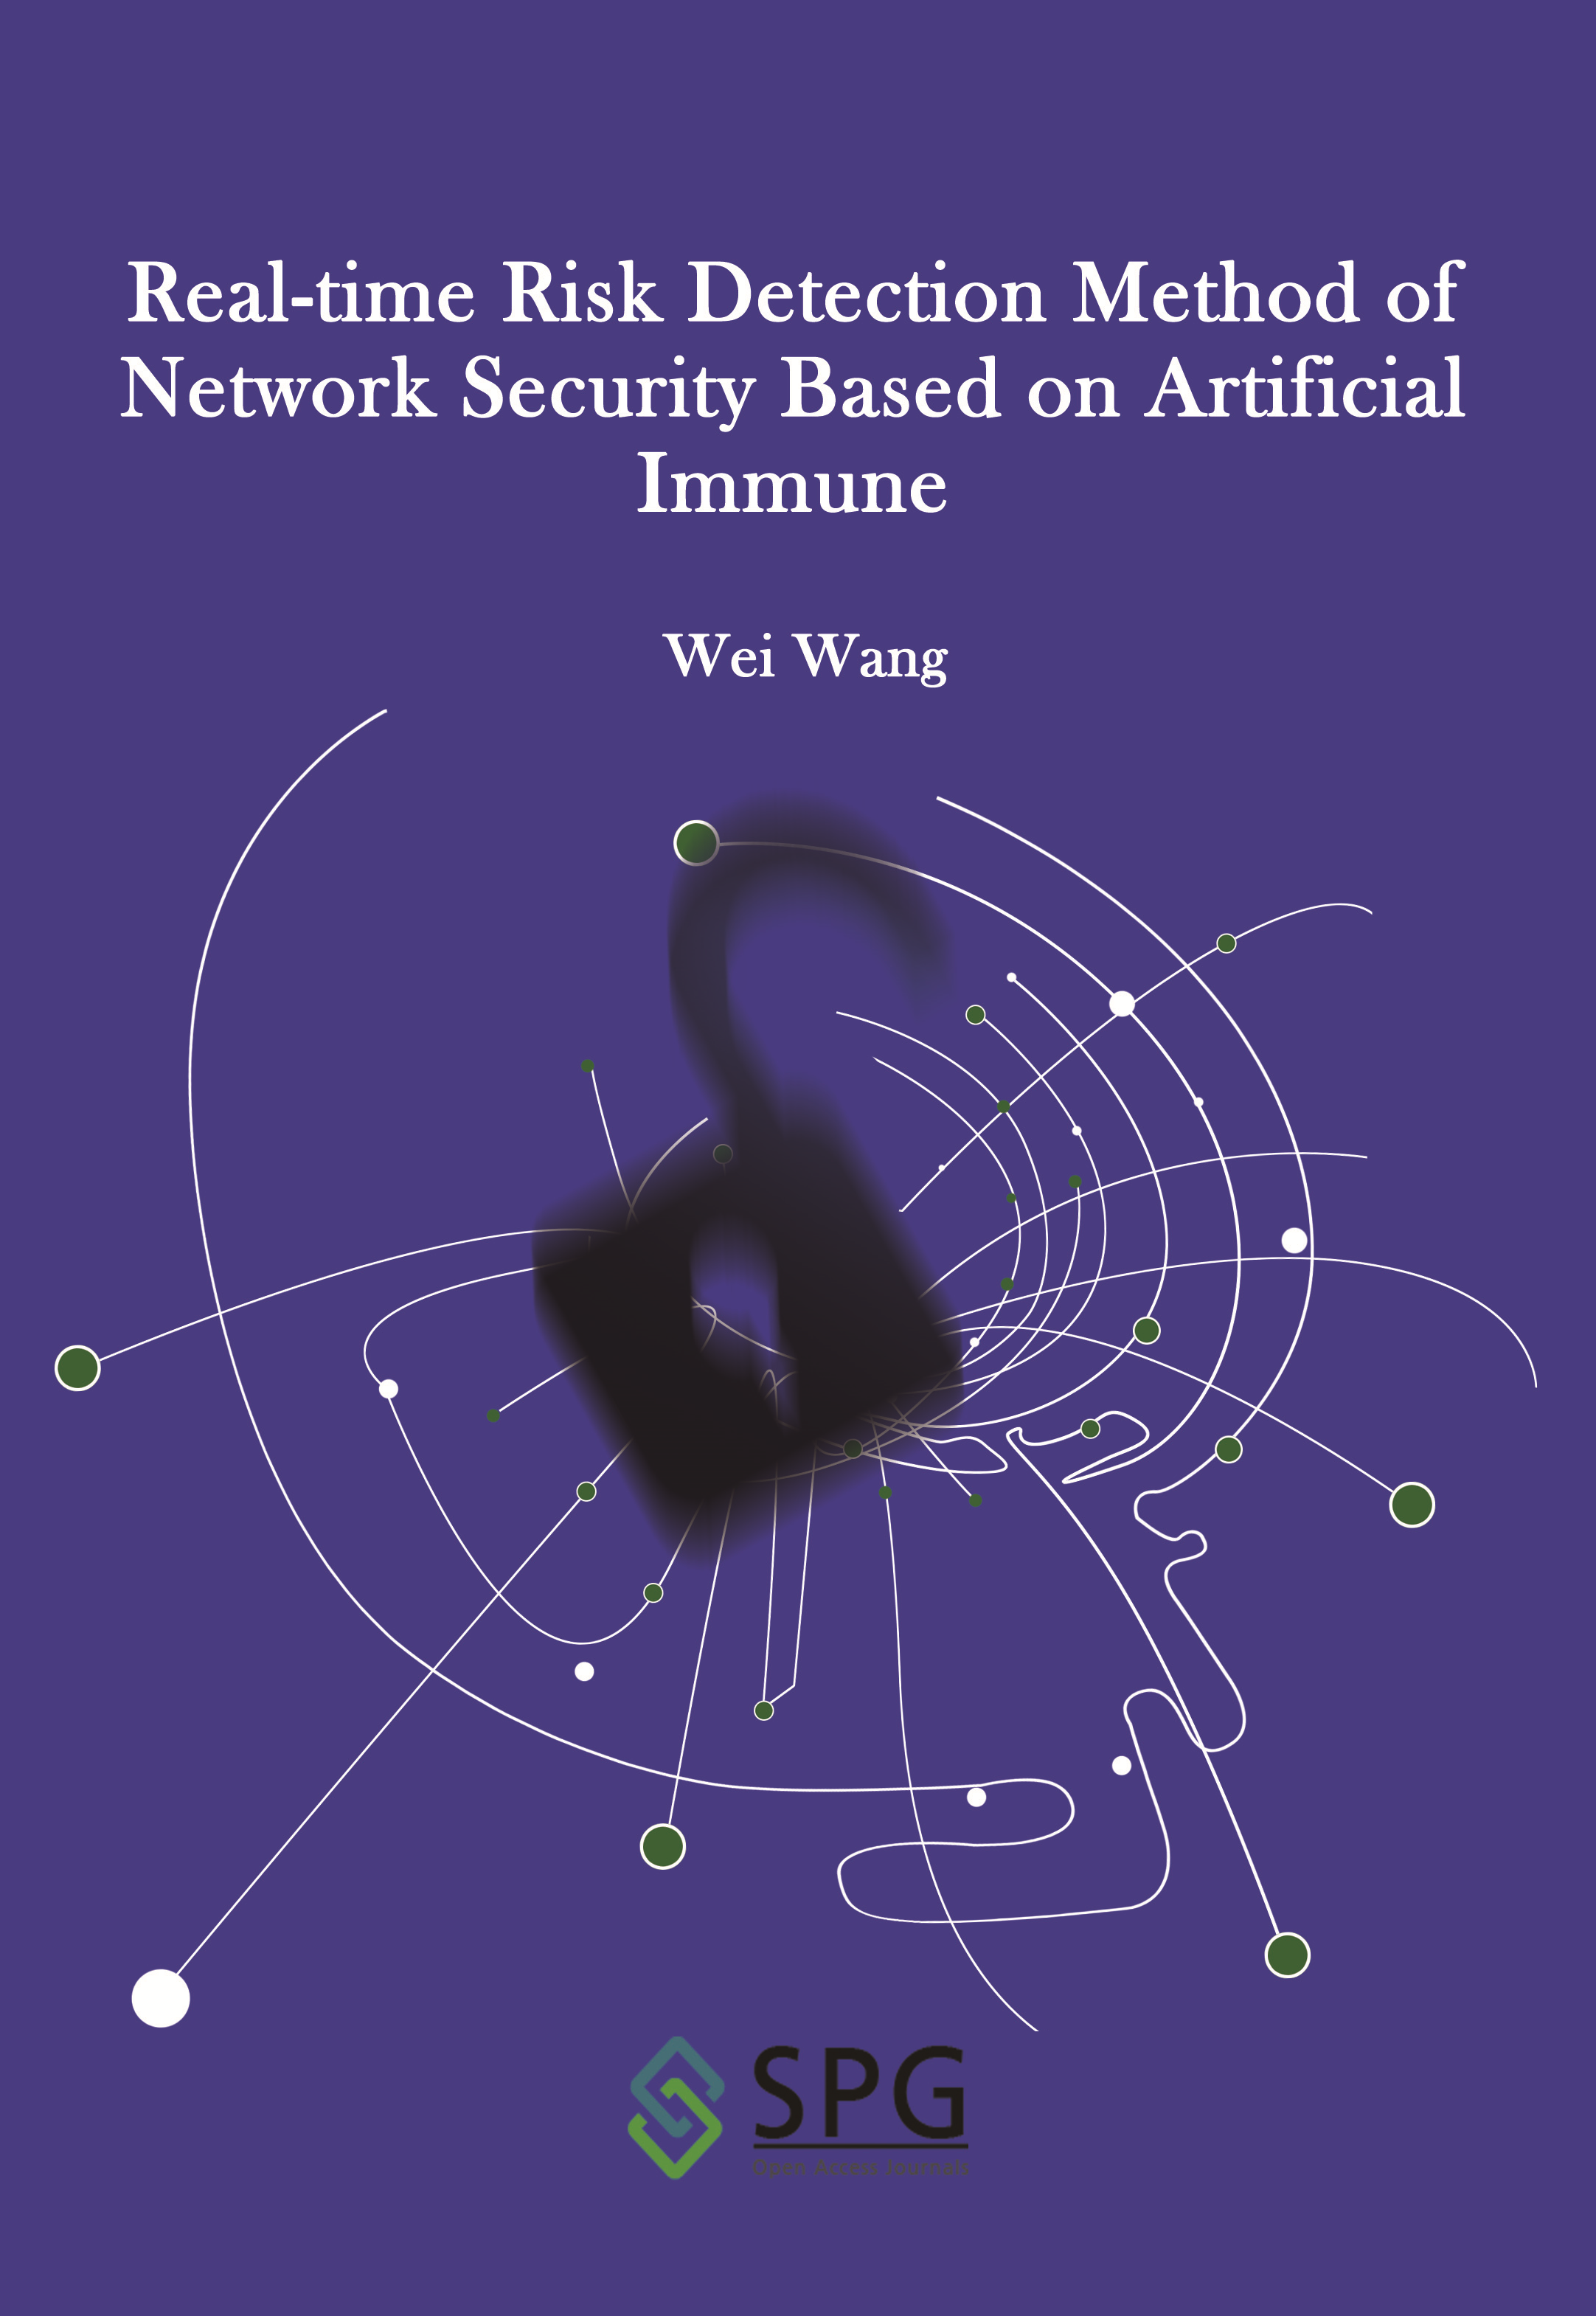 Real-time Risk Detection Method of Network Security Based on Artificial Immune | Scholar Publishing Group